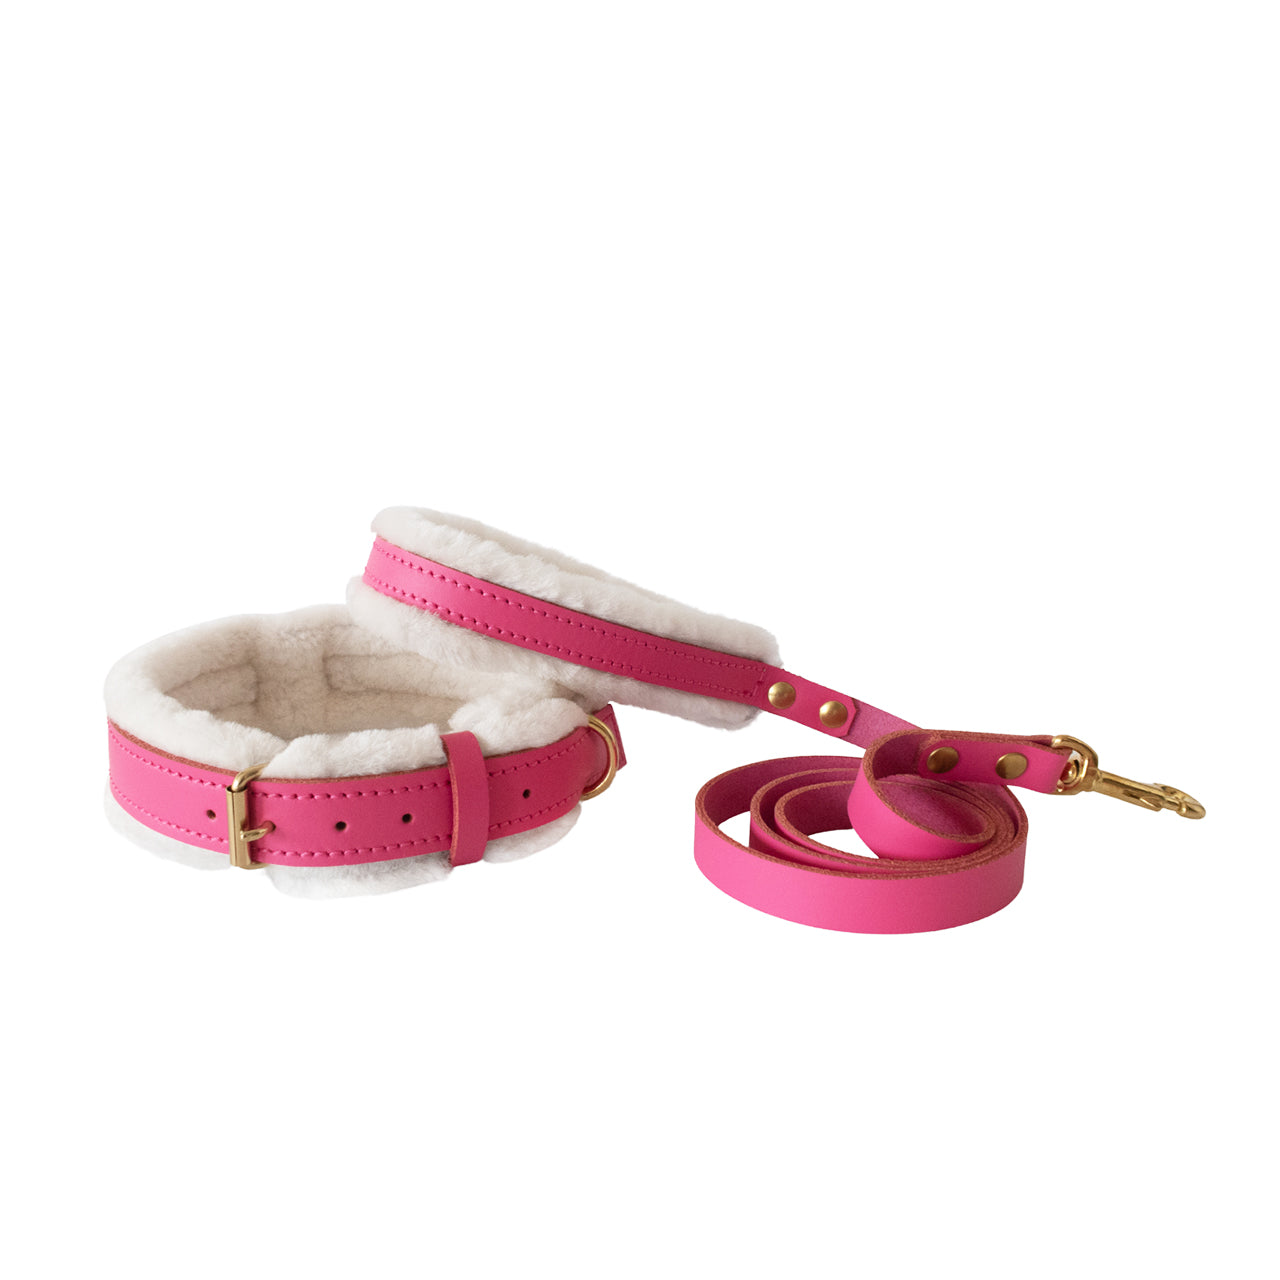 Pretty in Pink Fur and Leather Collar, Leash, and Accessory Set